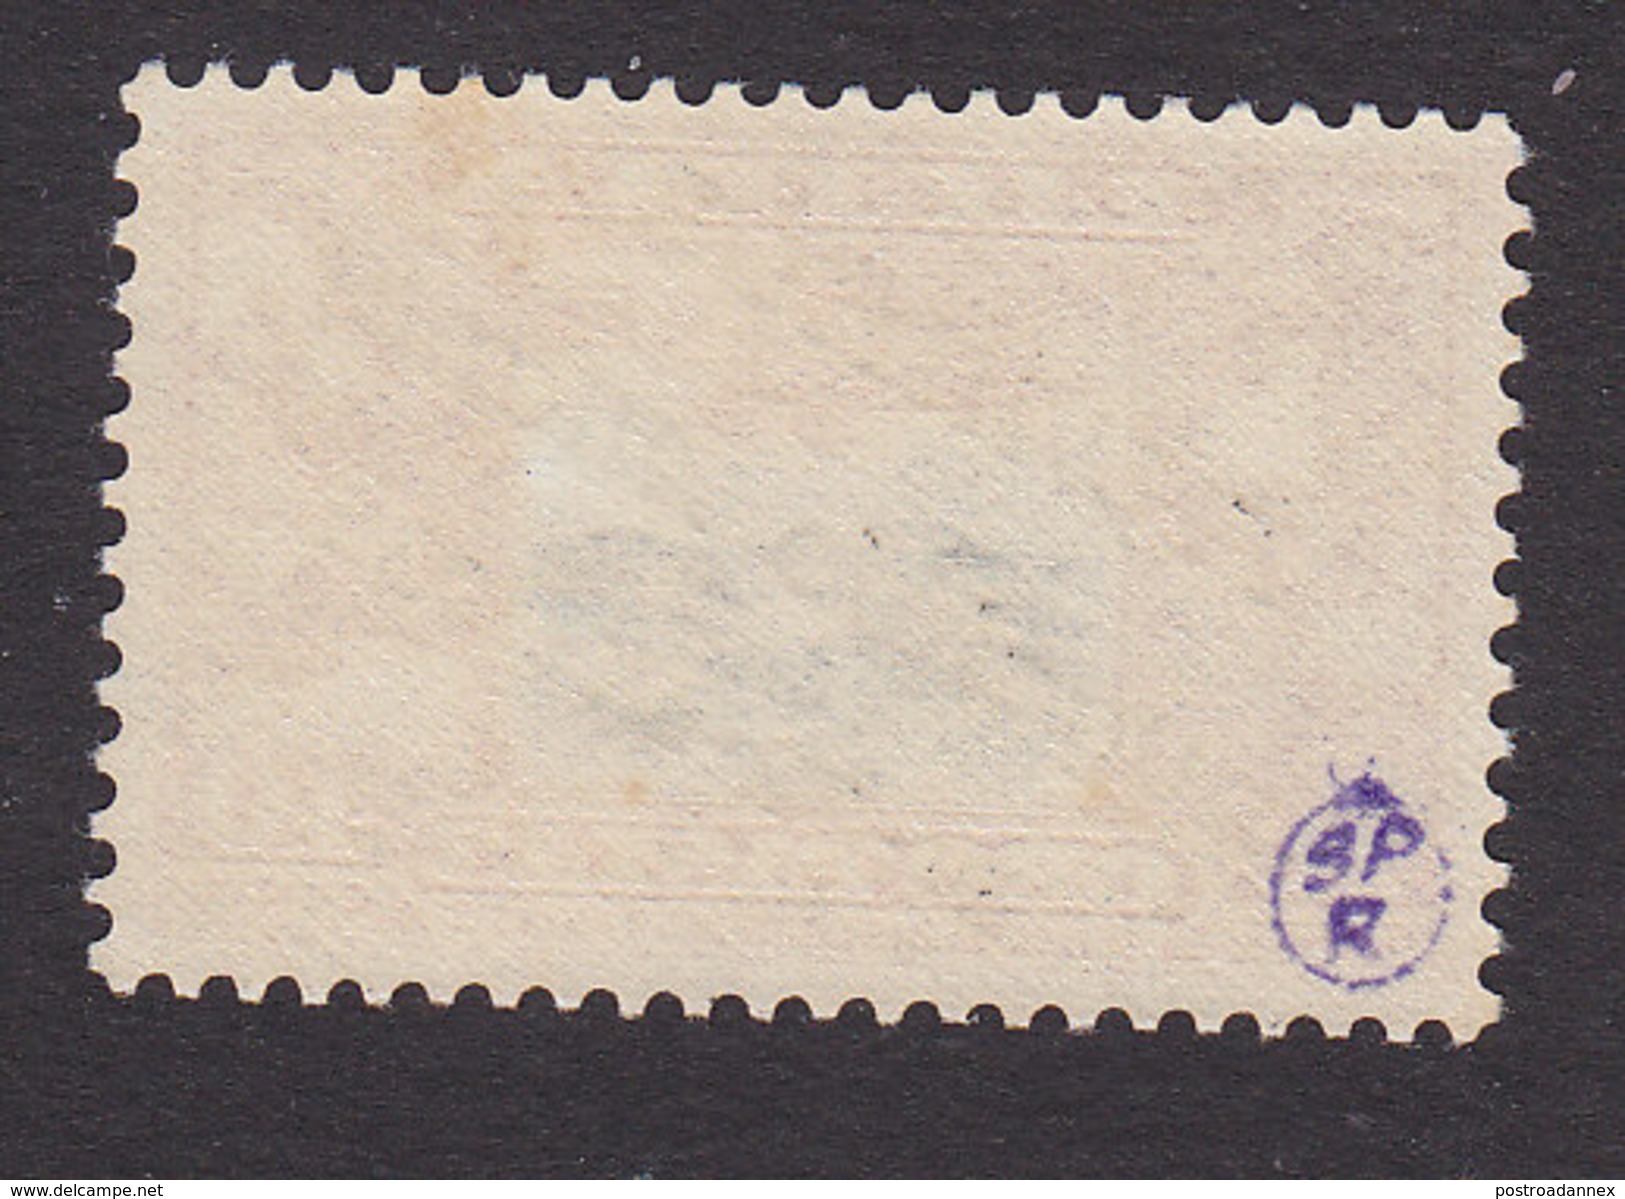 Lithuania, Scott #C80, Mint Hinged, Ill-Fated Plane "Lithuania" With Additional Overprint, Issued 1934 - Lithuania